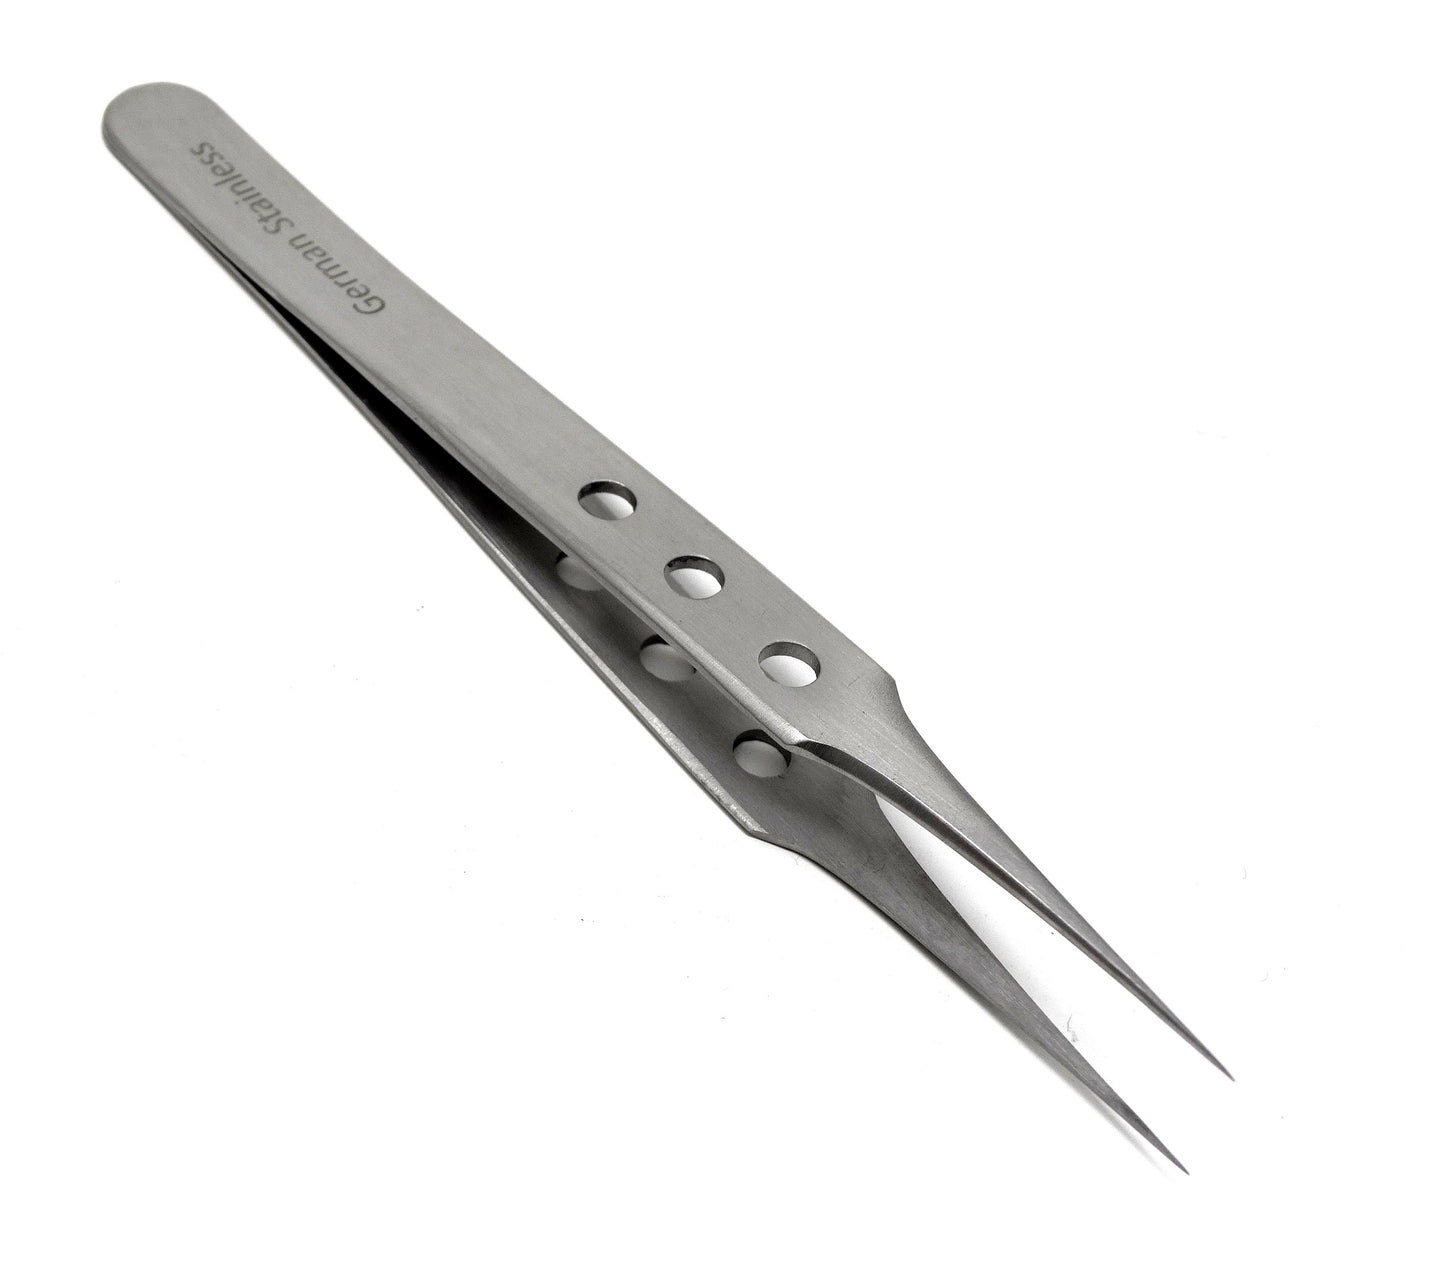 Stainless Steel Micro Surgical Forceps Tweezers A Type Straight, Fenestrated Handle, Fine Point, Premium Quality